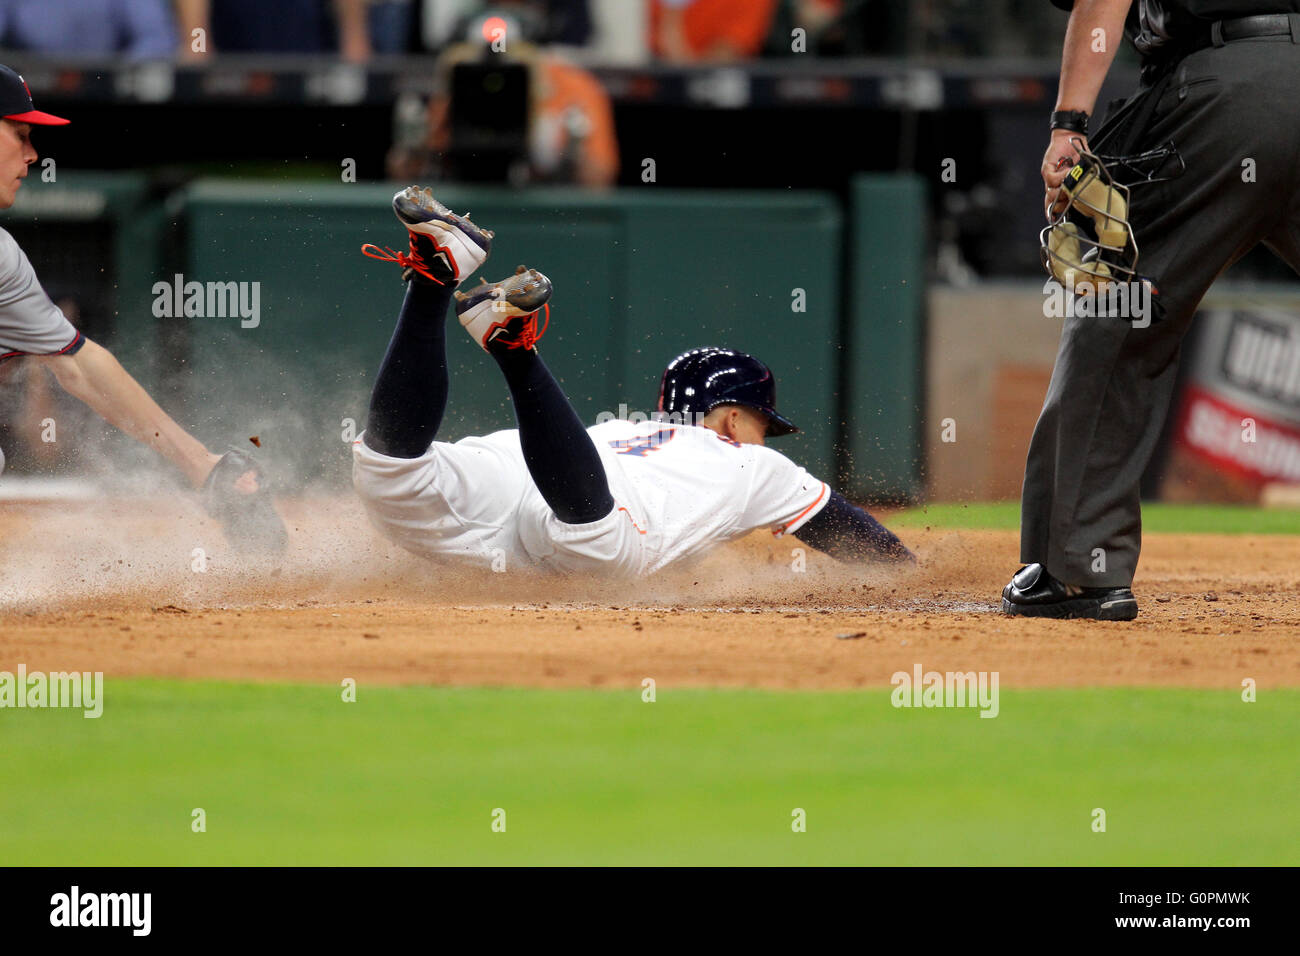 Houston, TX, USA. 03rd May, 2016. Houston Astros right fielder George Springer (4) slides across home plate to score a run on a wild pitch during the third inning of the MLB baseball game between the Houston Astros and the Minnesota Twins from Minute Maid Park in Houston, TX. Credit image: Erik Williams/Cal Sport Media/Alamy Live News Stock Photo